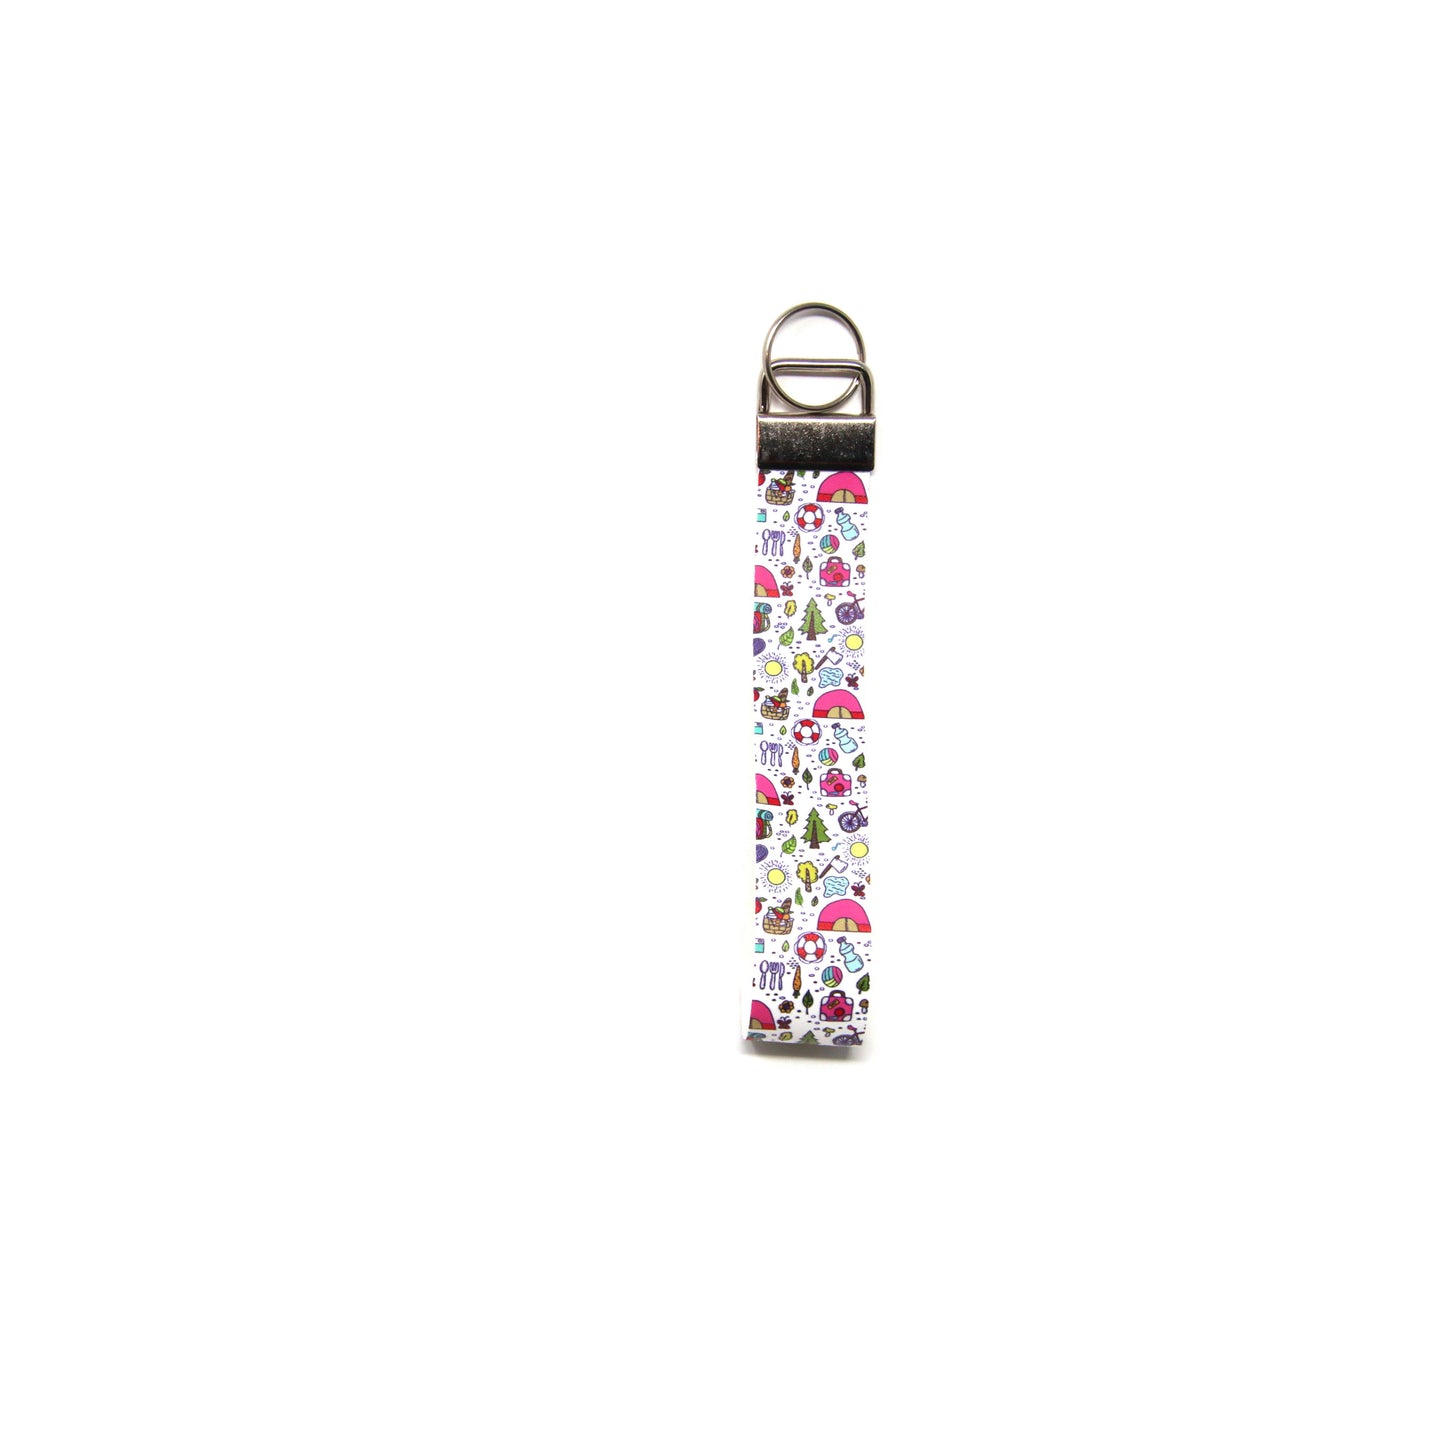 6 inch Going Camping Wristlet Key Chain